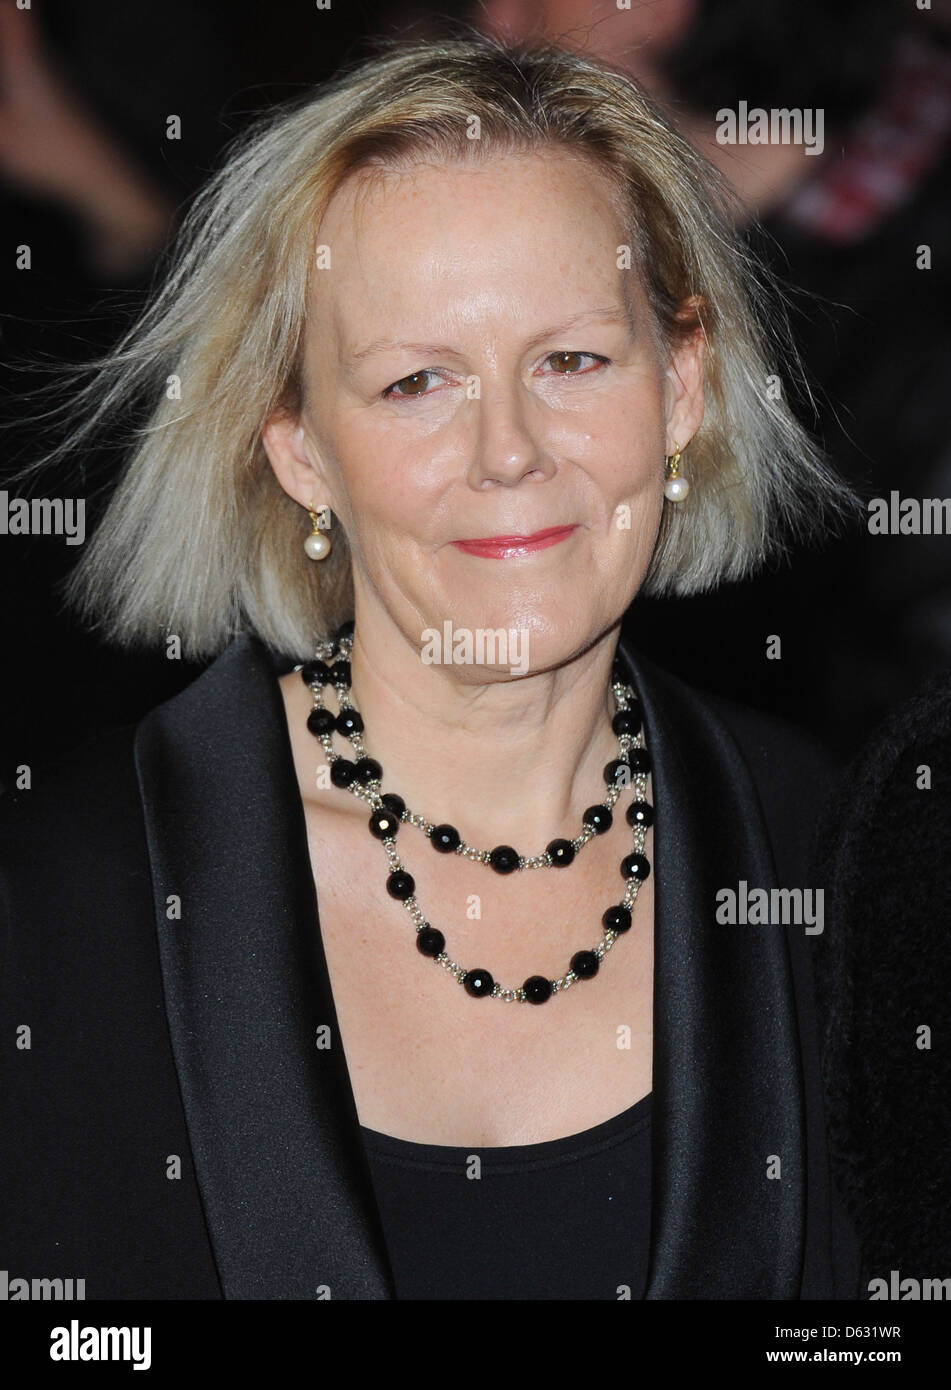 Phyllida Lloyd 'The Iron Lady' UK film premiere held at the BFI Southbank - Arrivals London, England- 04.01.12 Stock Photo